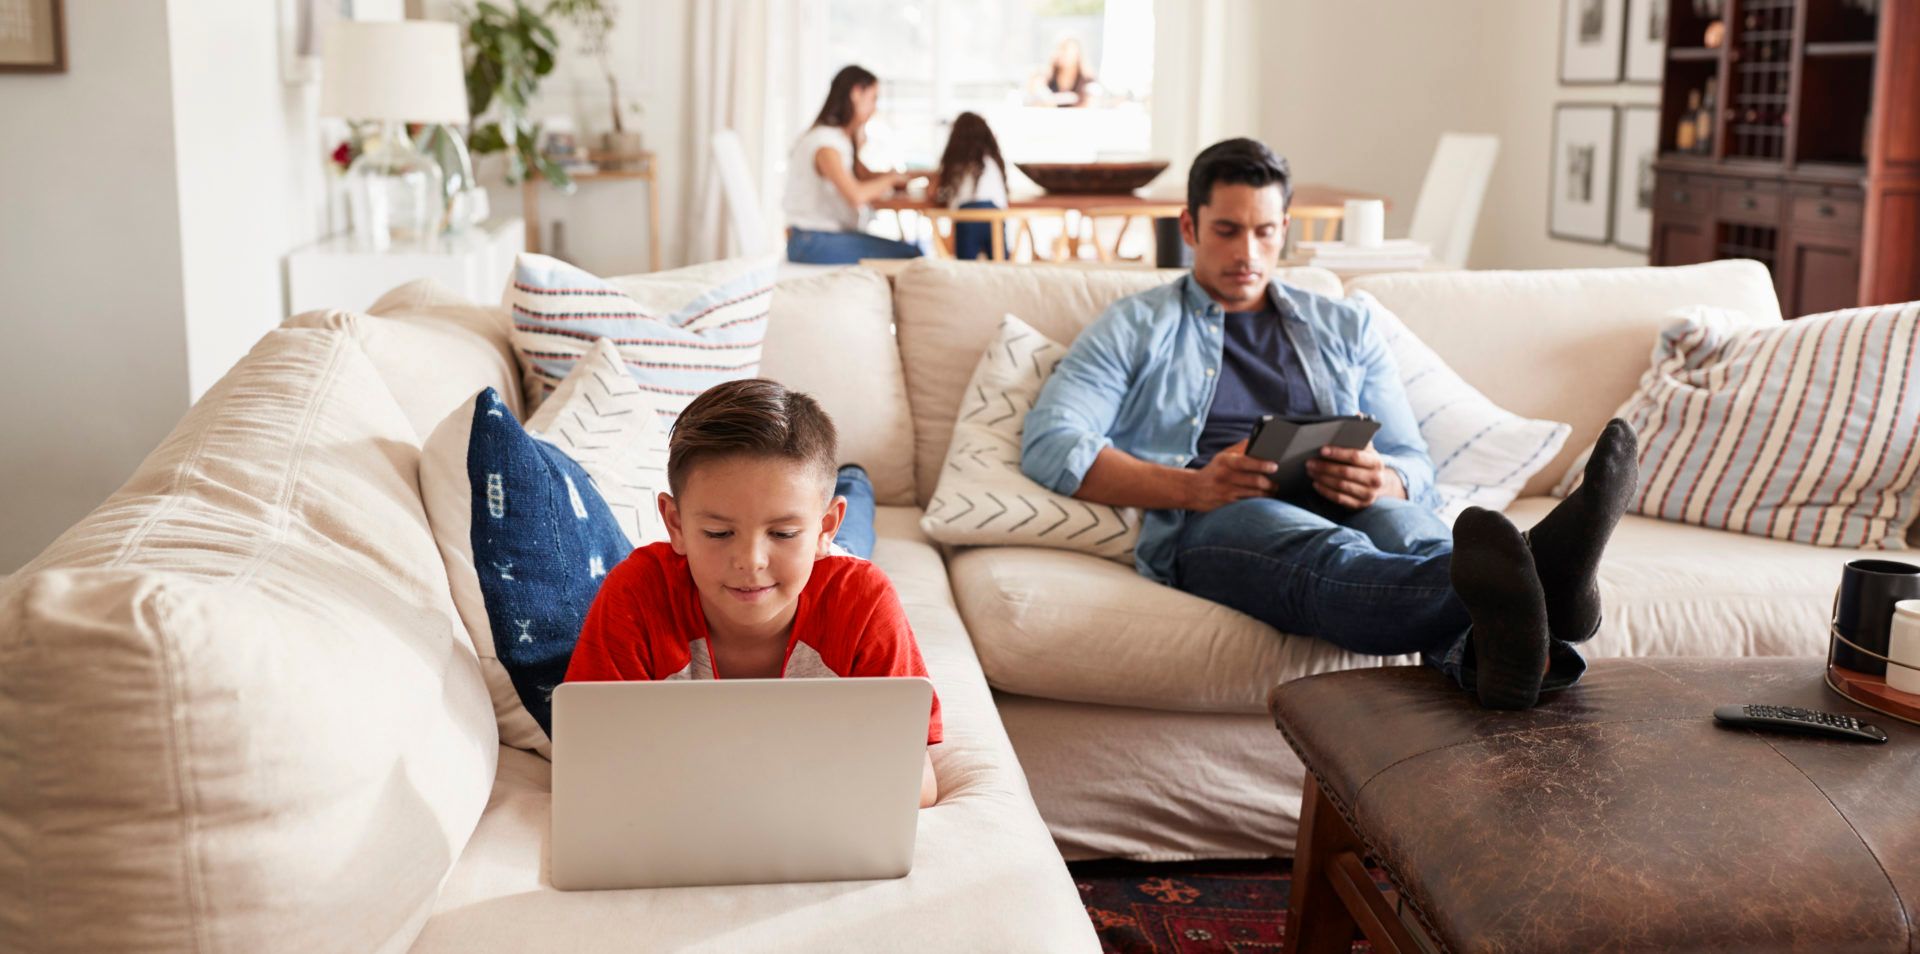 Child using laptop on couch while adult is looking at tablet